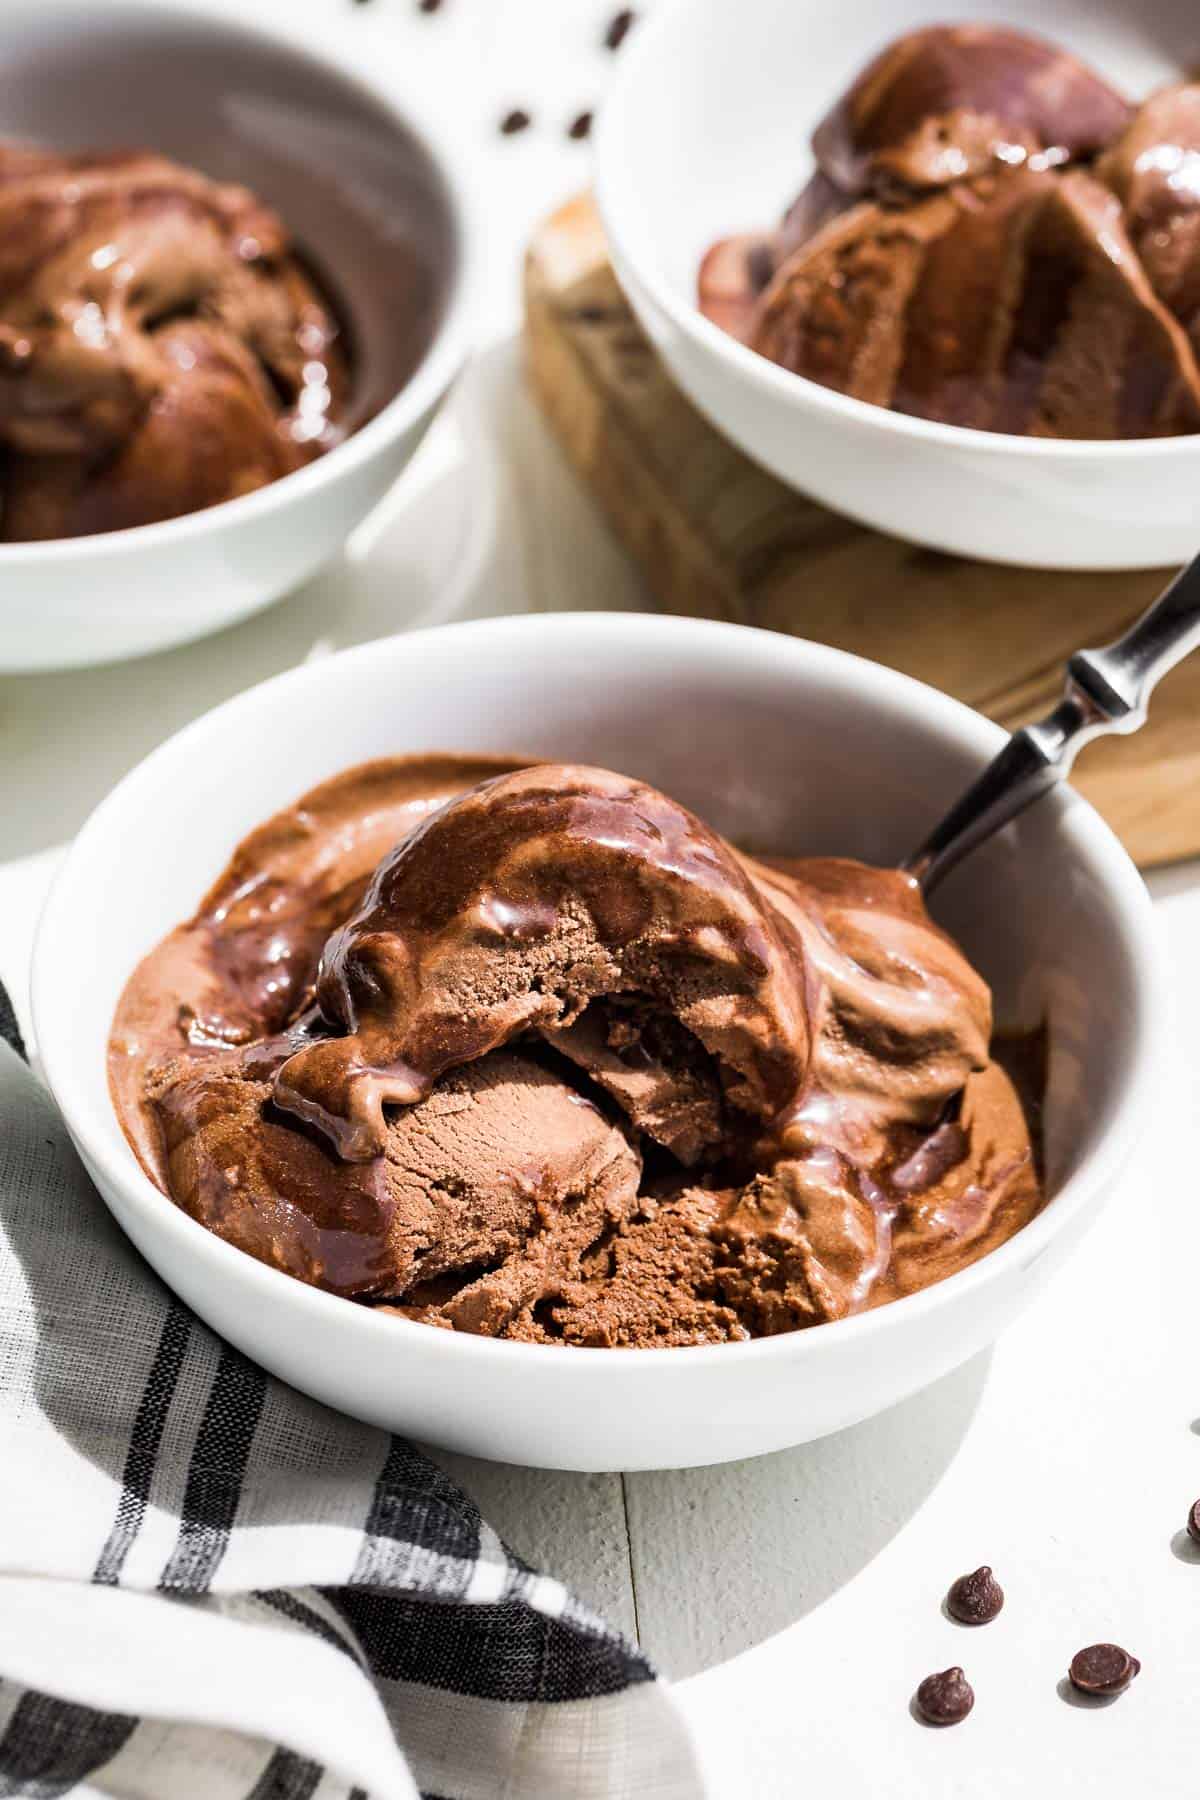 Three white bowls of chocolate avocado ice cream drizzled with chocolate sauce and bite taken out of the front bowl.